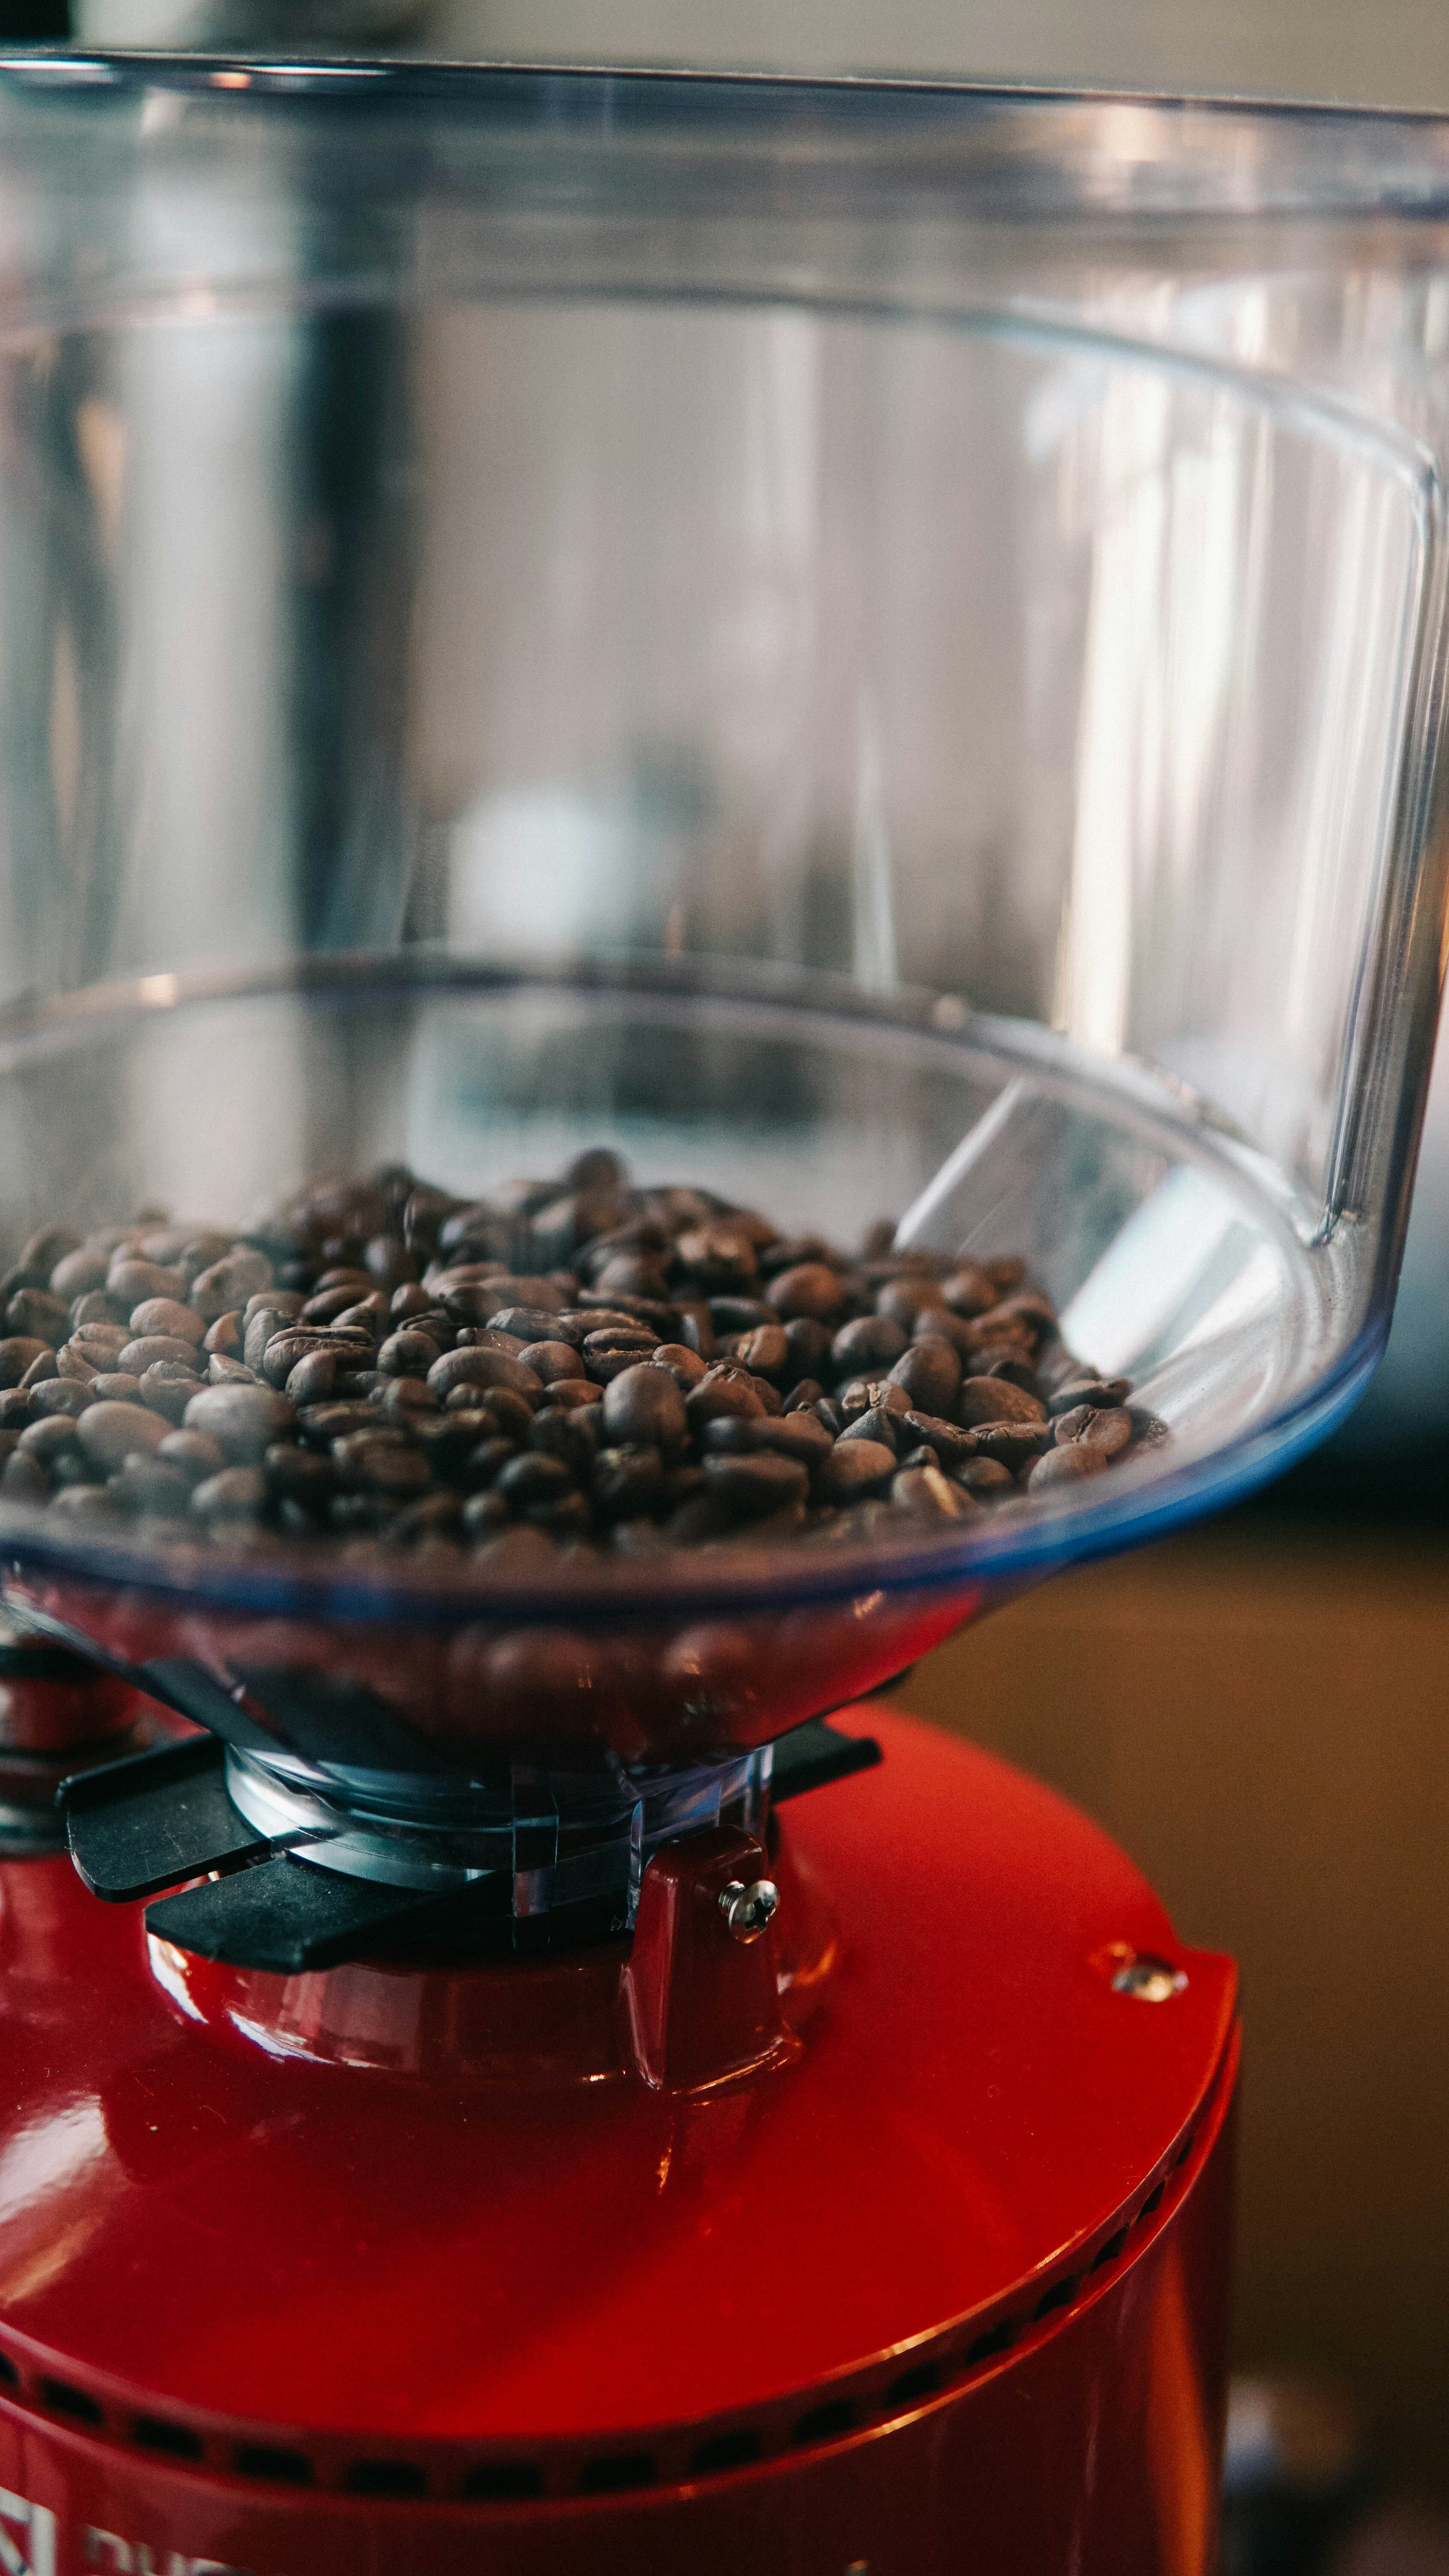 a coffee bean that is prepared by the barista to make coffee latte.